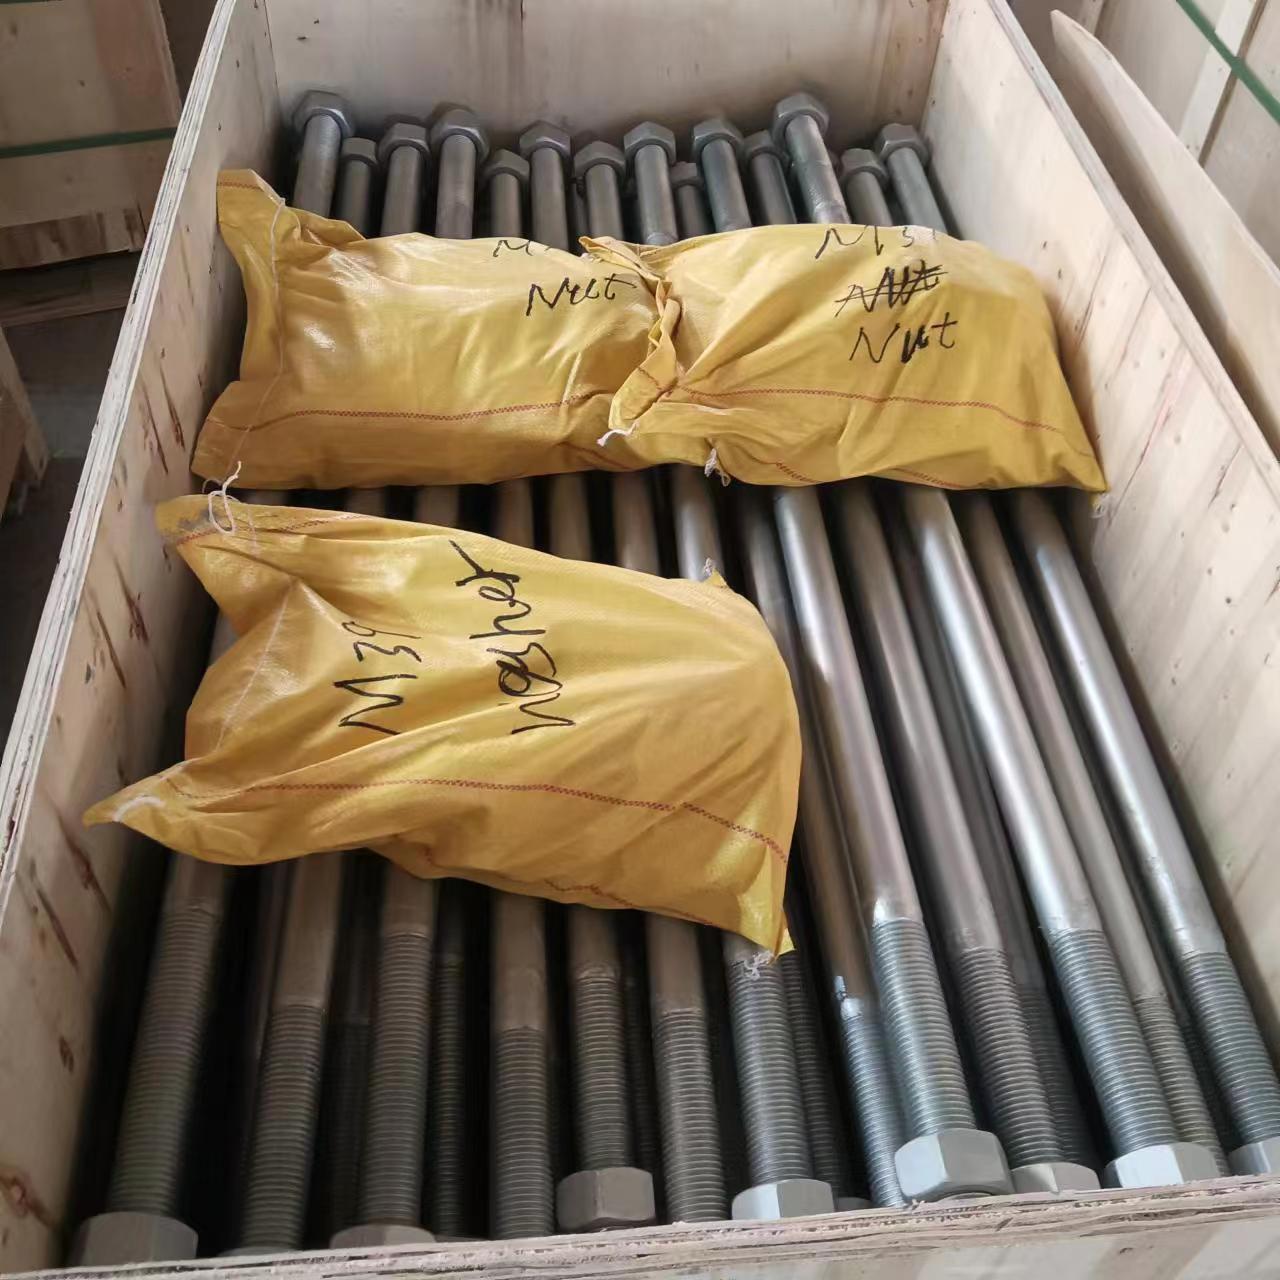 Grade 4.8 8.8 12.9 HDG Hot Galvanized I Shape Double End Threaded Anchor Bolt Manufacturer in China